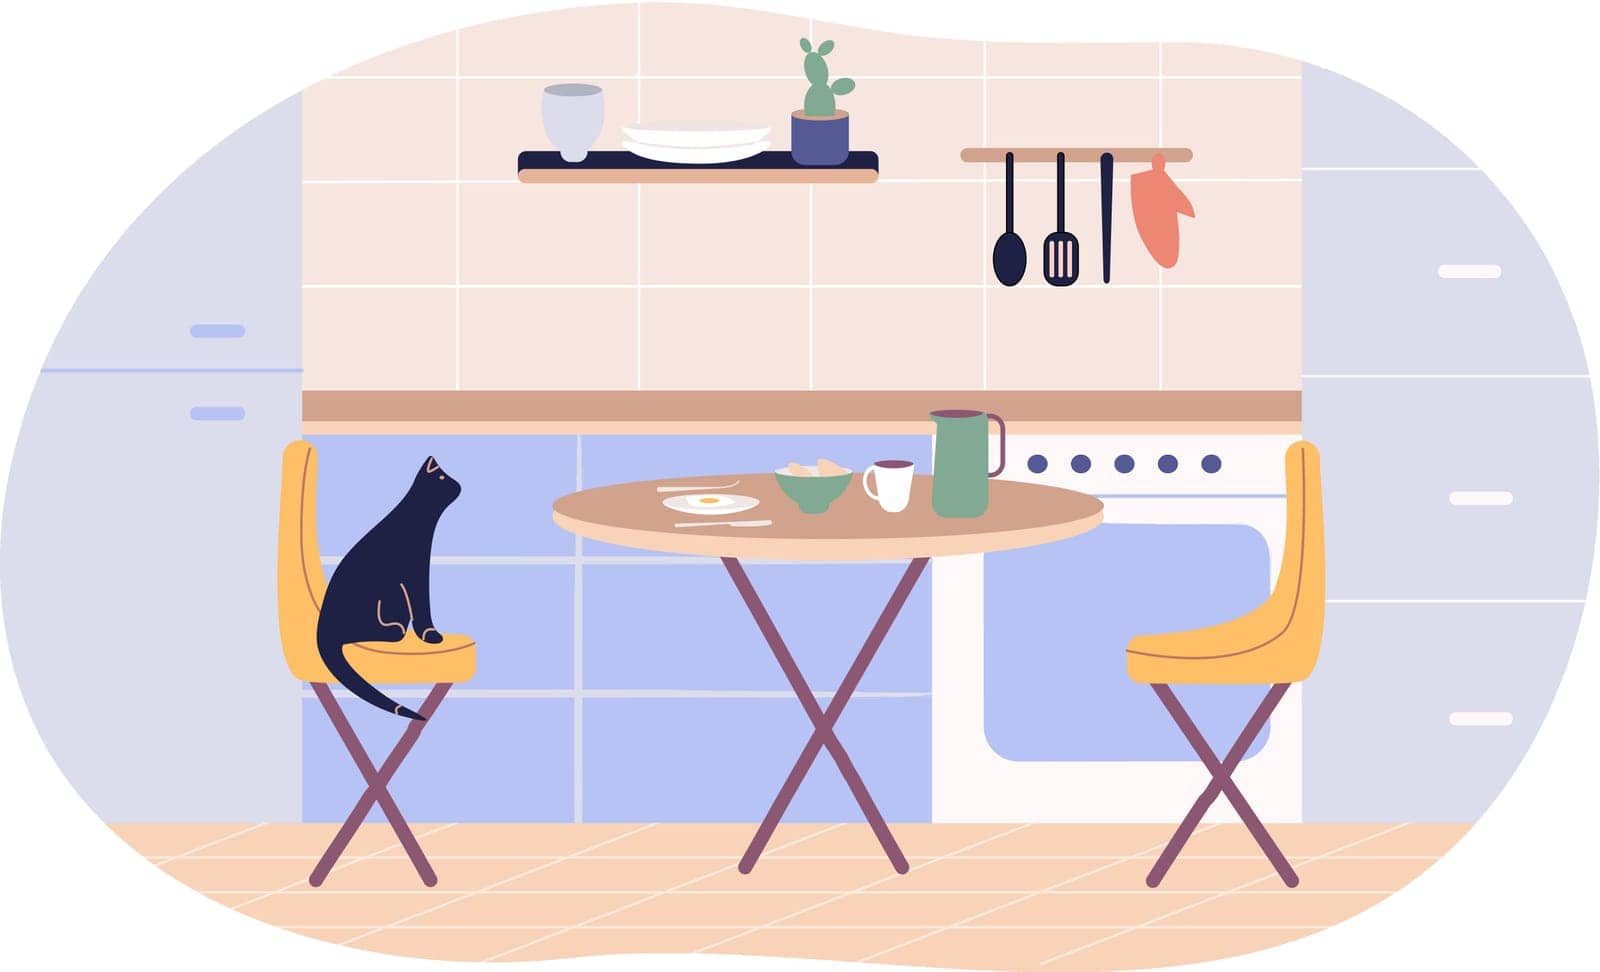 Kitchen room, breakfast on the table, a cat sitting on a chair. Daily routines and everyday activities concept. Flat cartoon vector illustration